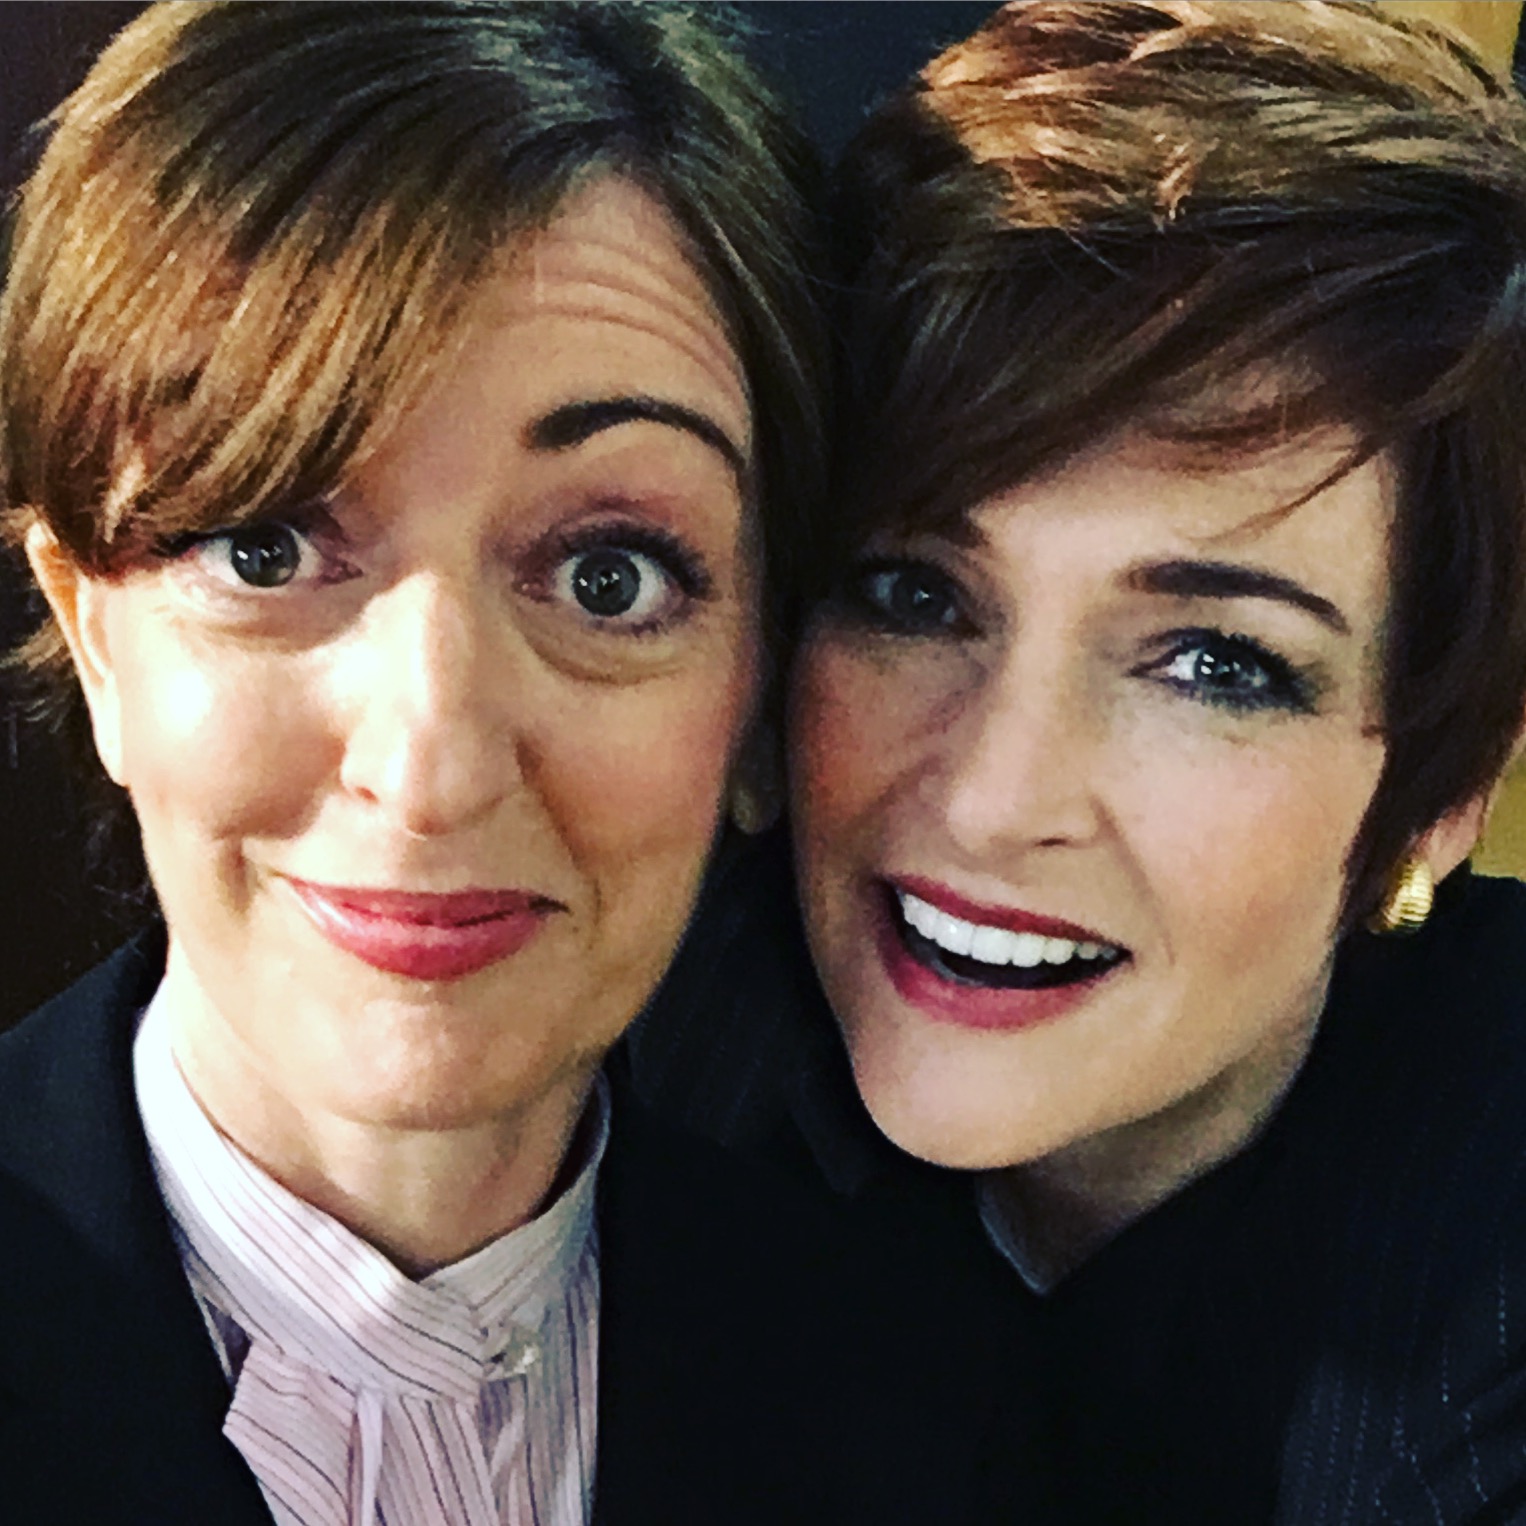 For a cause...Patti Troisi & Carolyn Hennesy on PSA